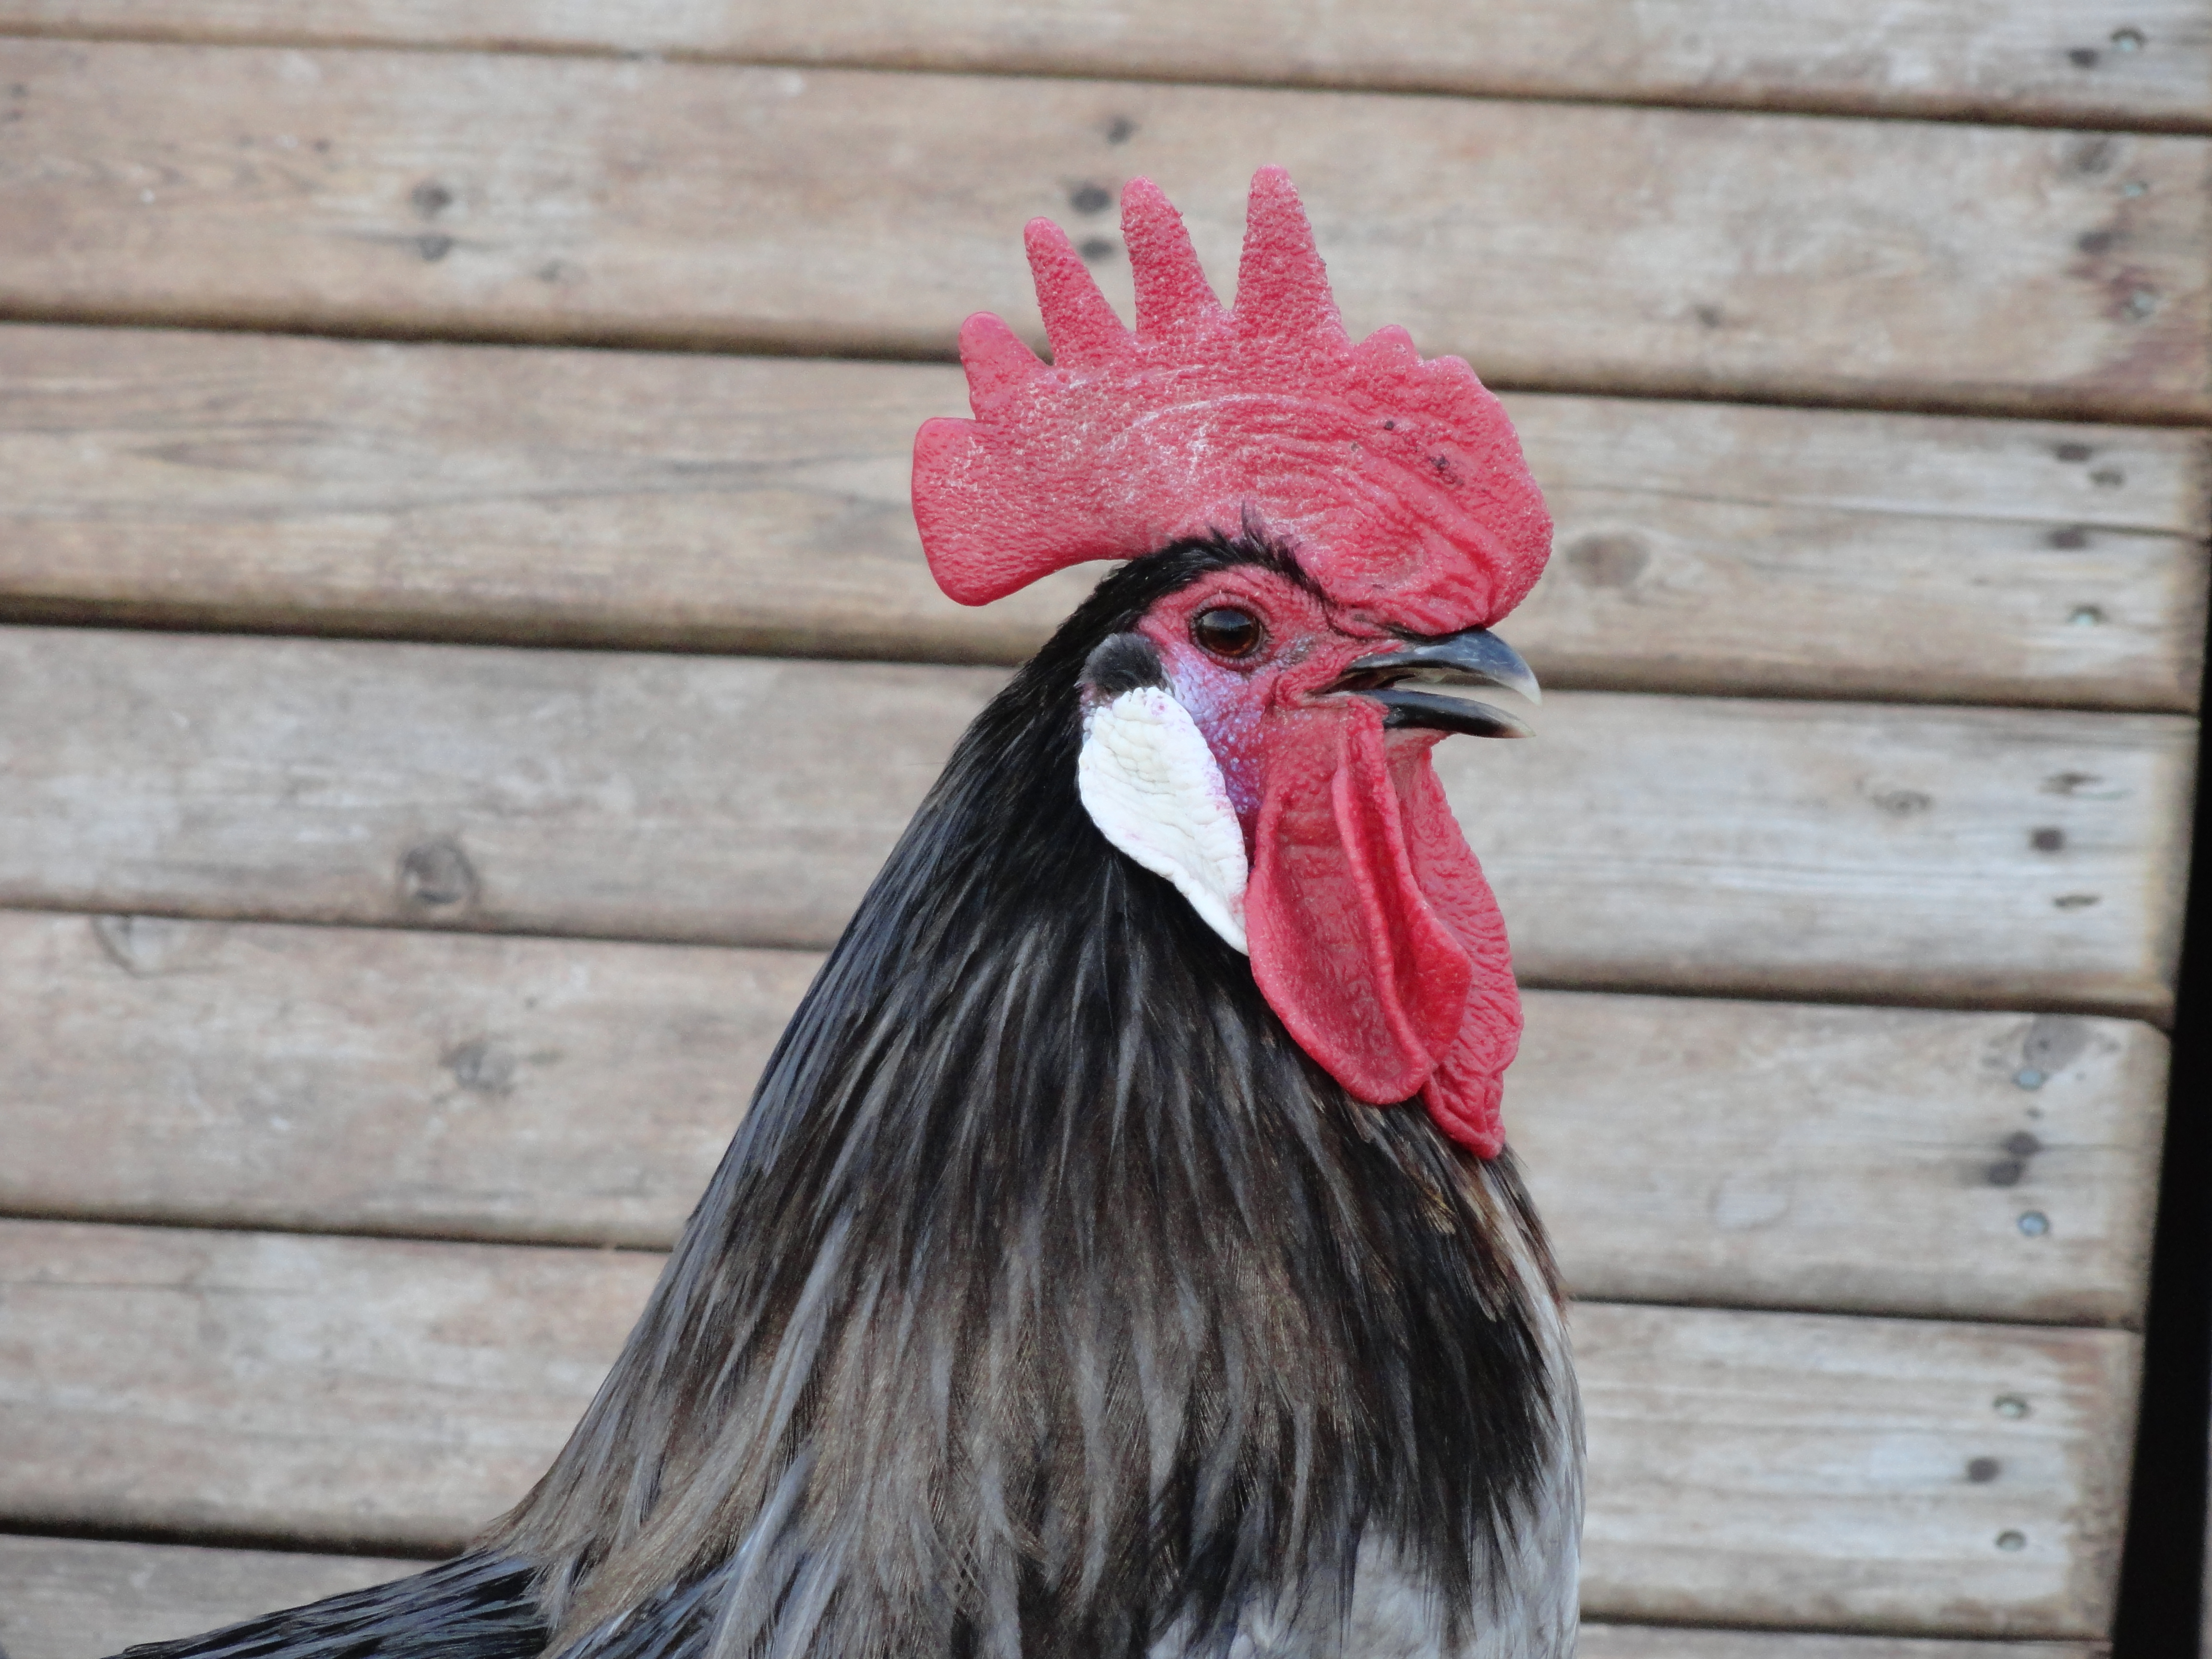 Blue Andausian Rooster "Alejandro"